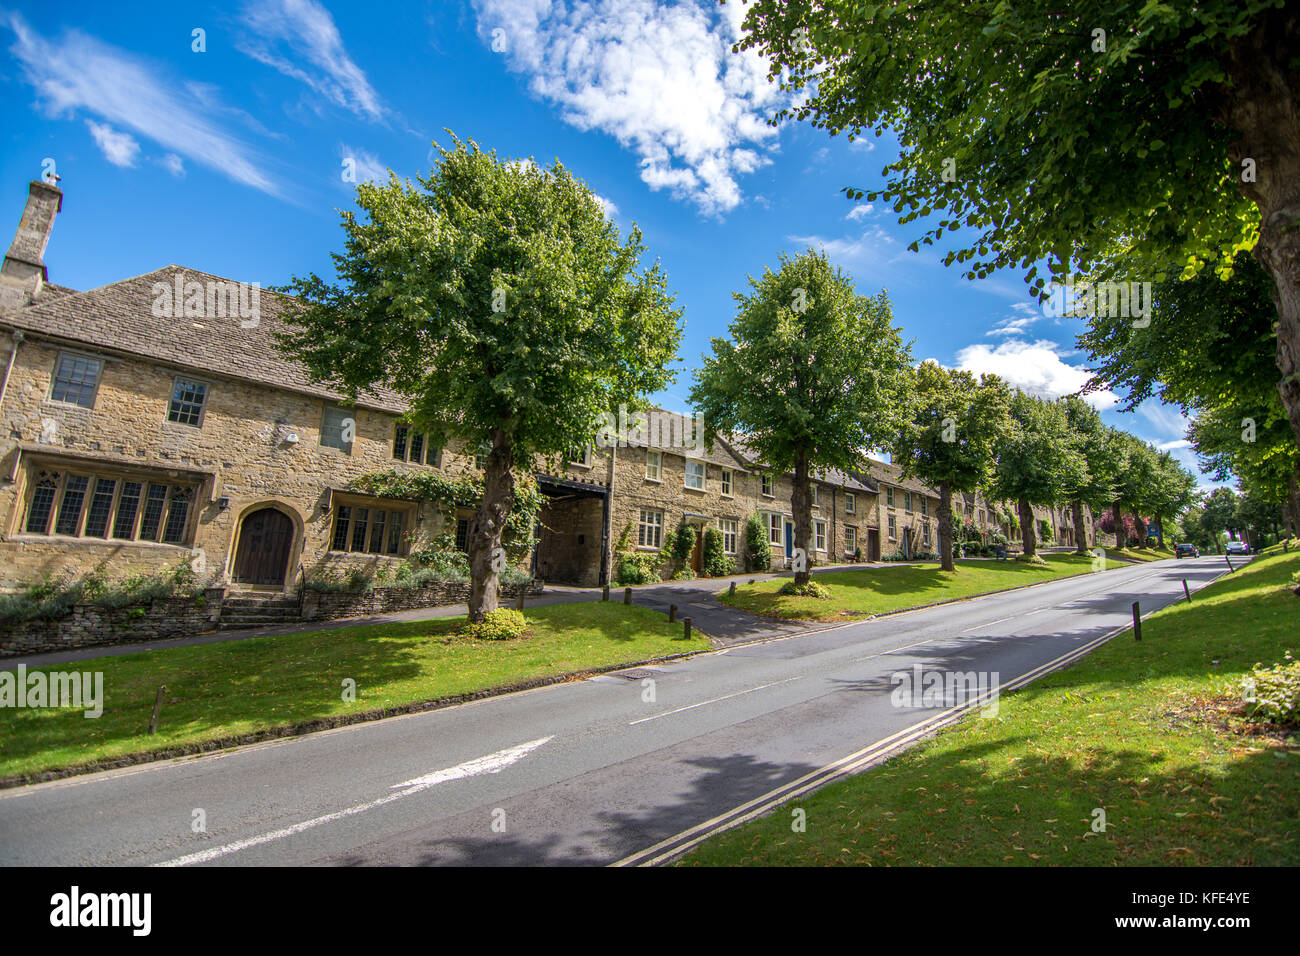 Burford, UK - July 30, 2017: The main street in Burford village on a sunny day Stock Photo